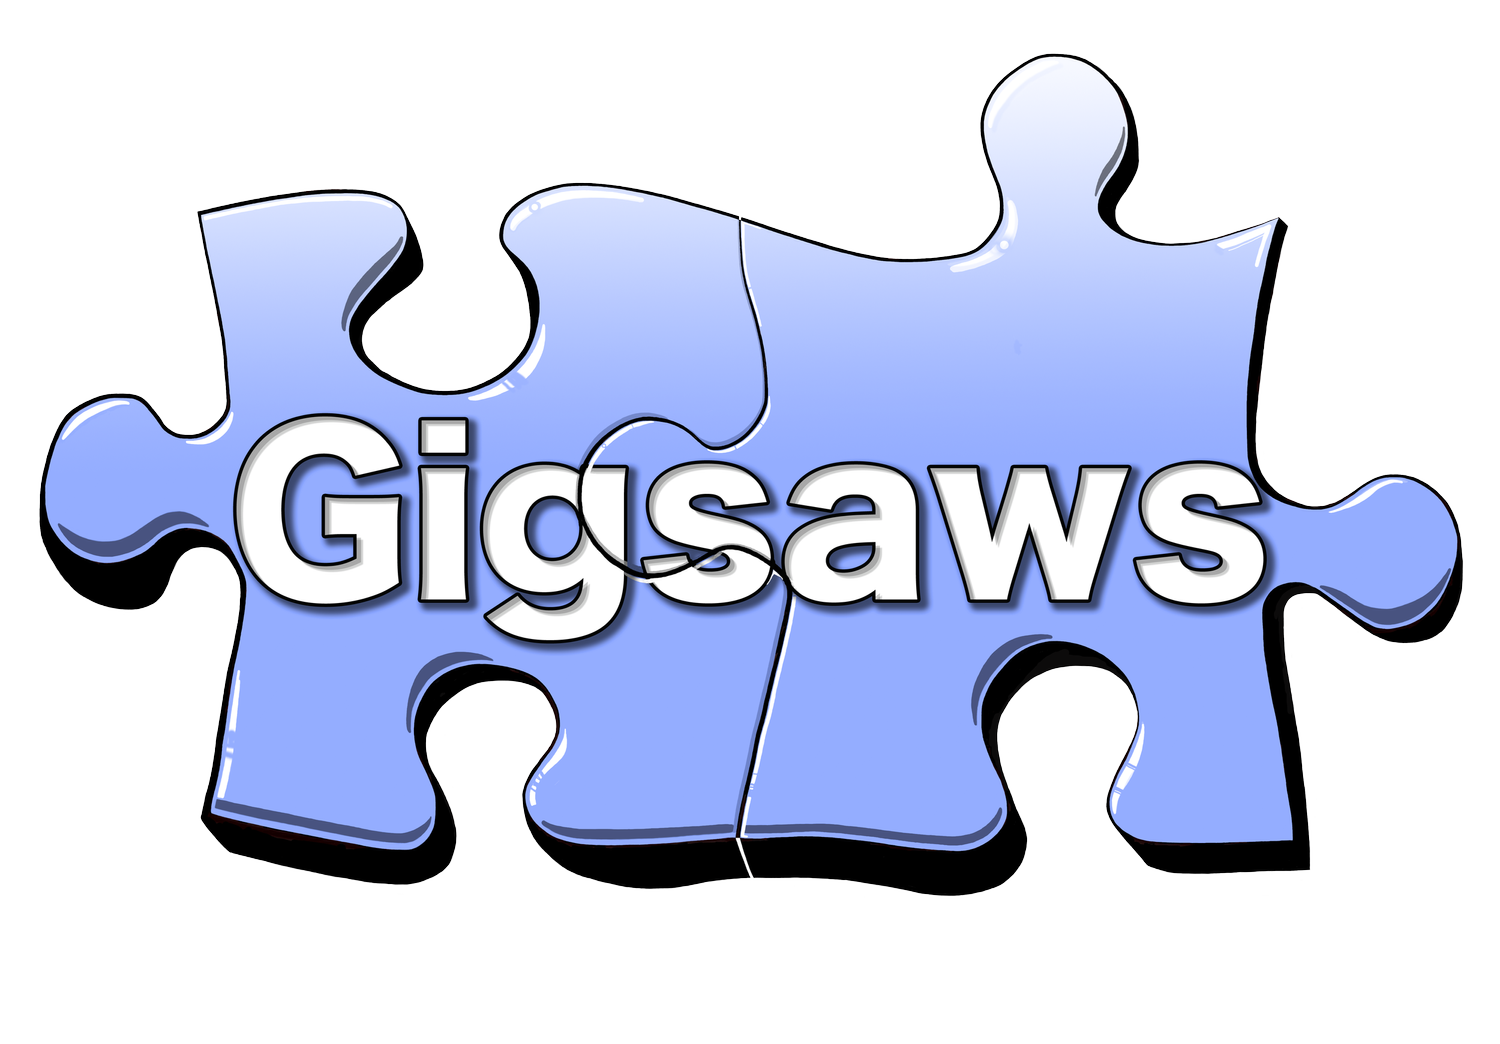 Gigsaws, Rocking good music puzzles